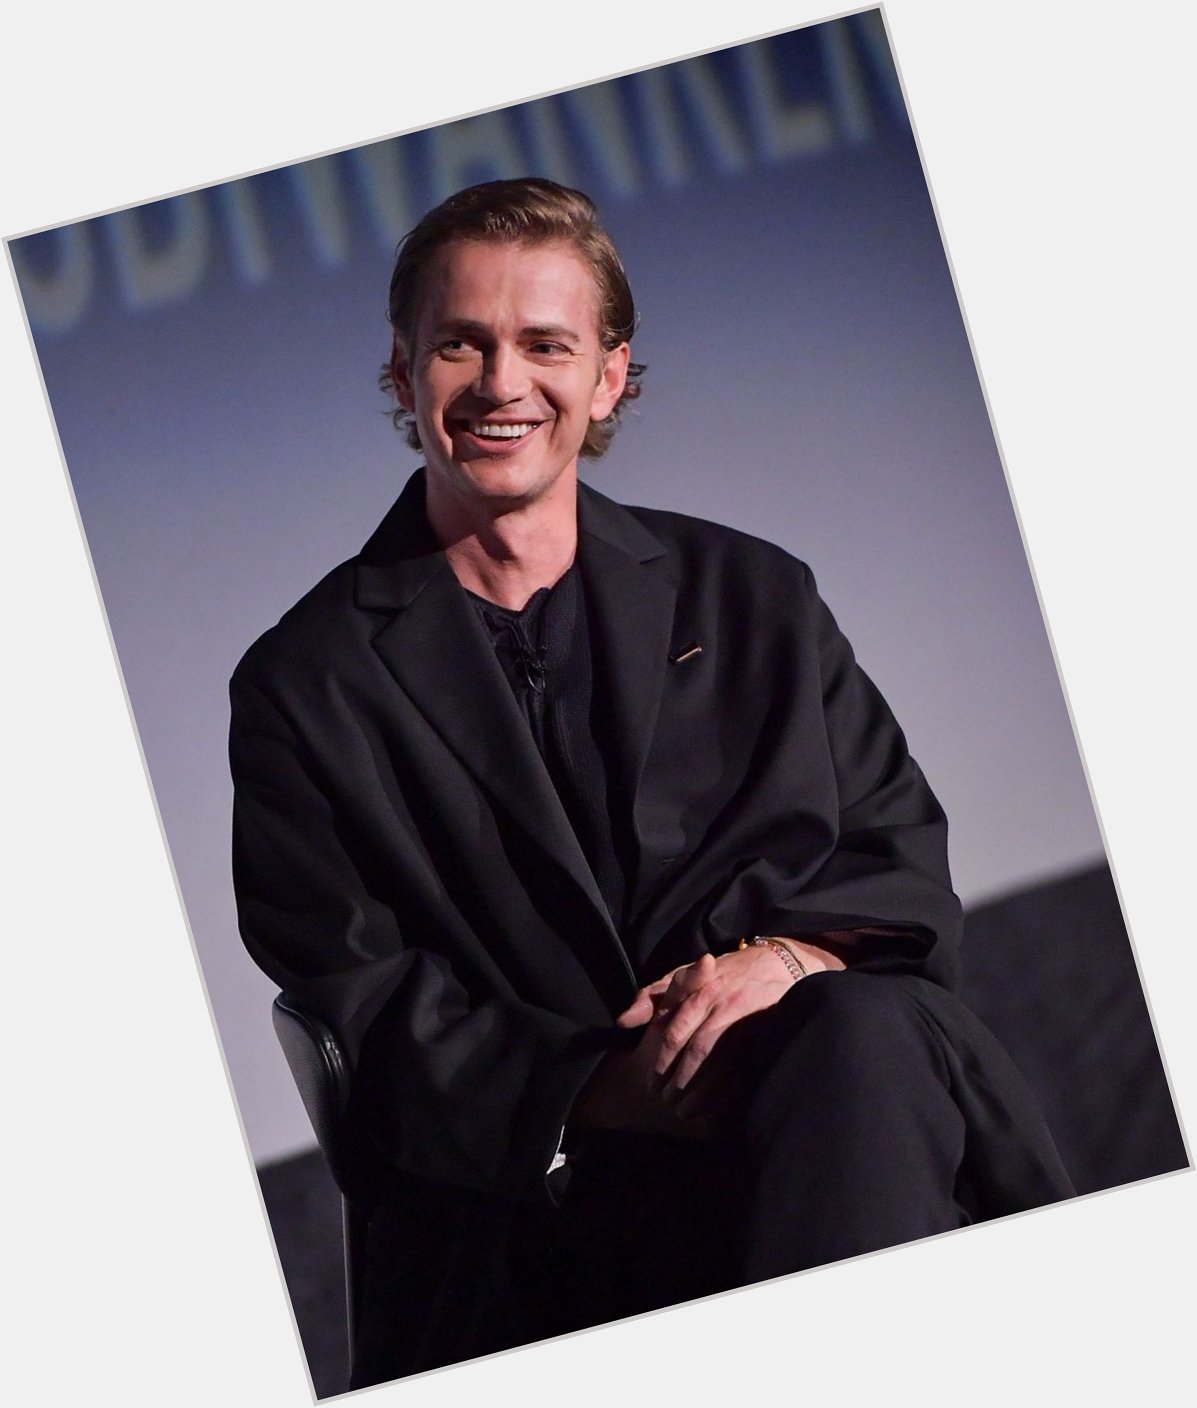 Happy Birthday to the chosen one Hayden Christensen May the Force always be with you! 